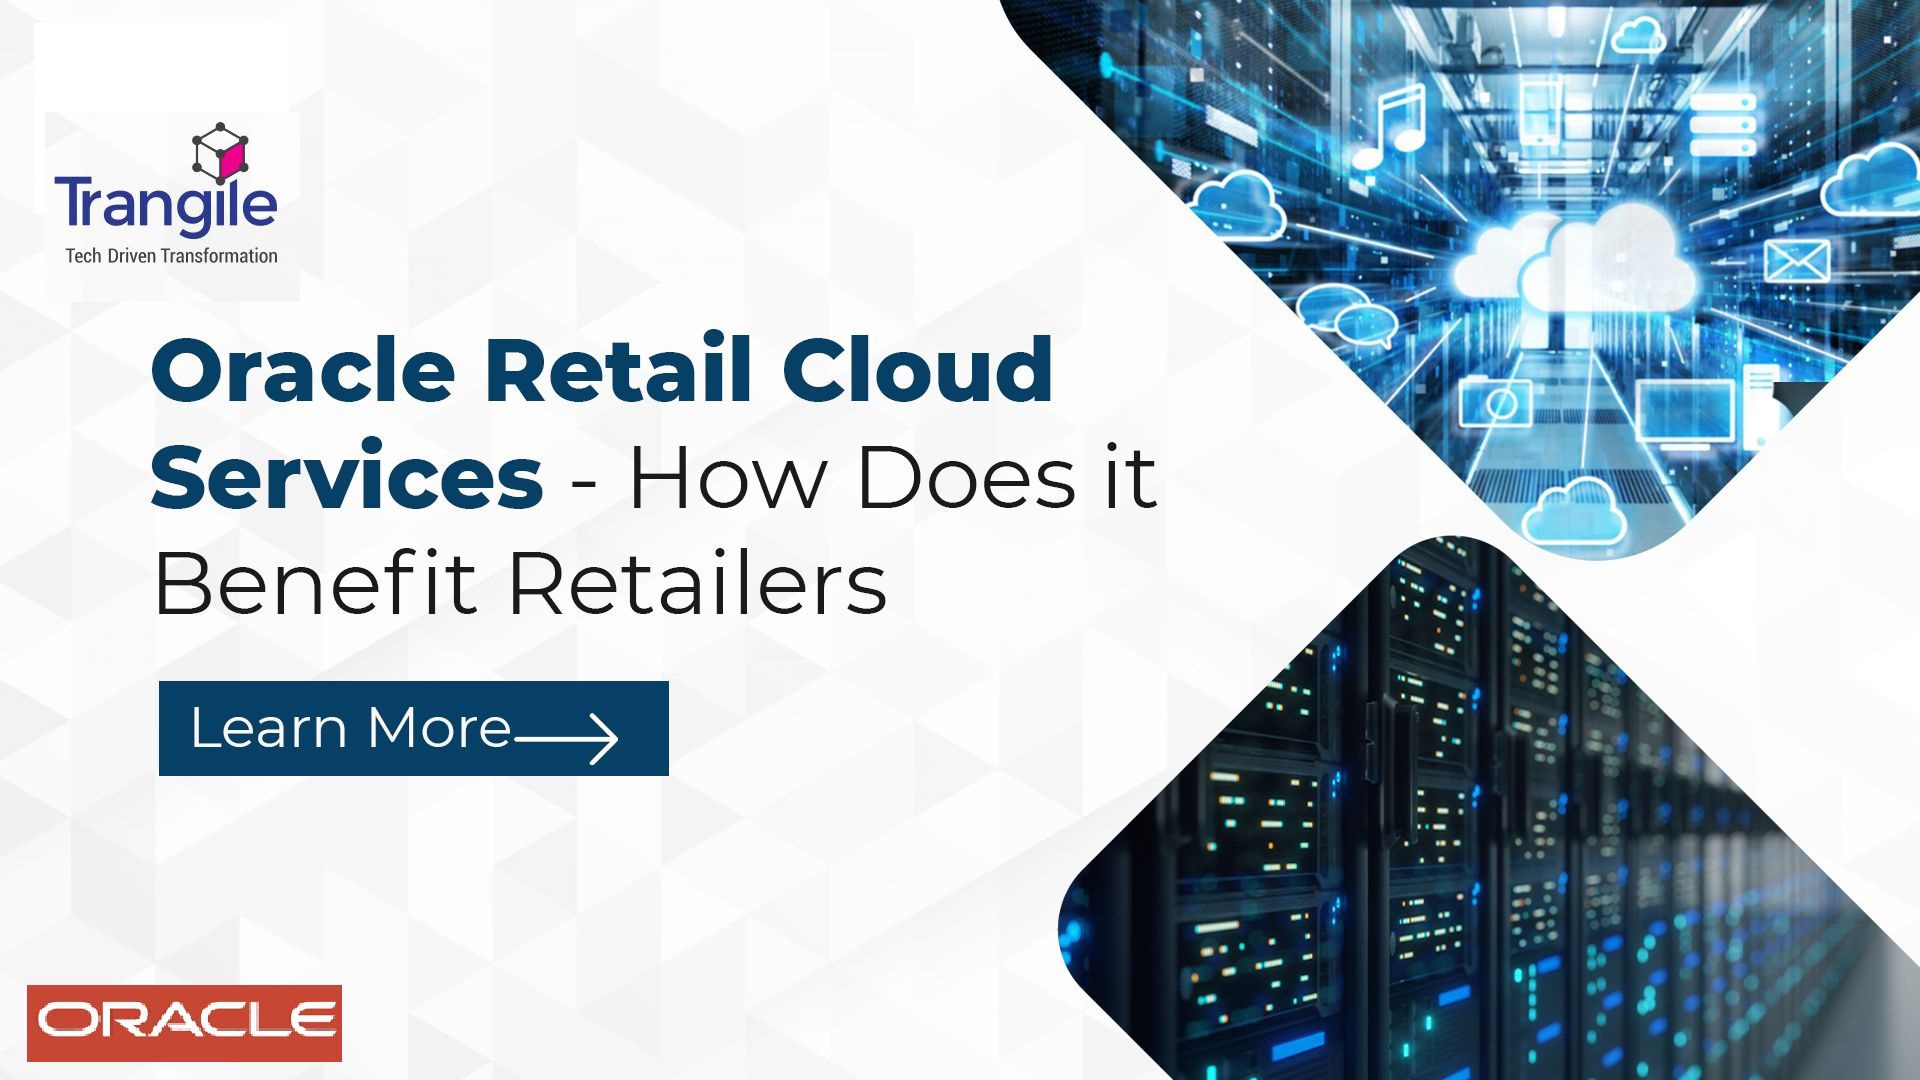 Oracle Retail Cloud Services – How Does it Benefit Retailers?